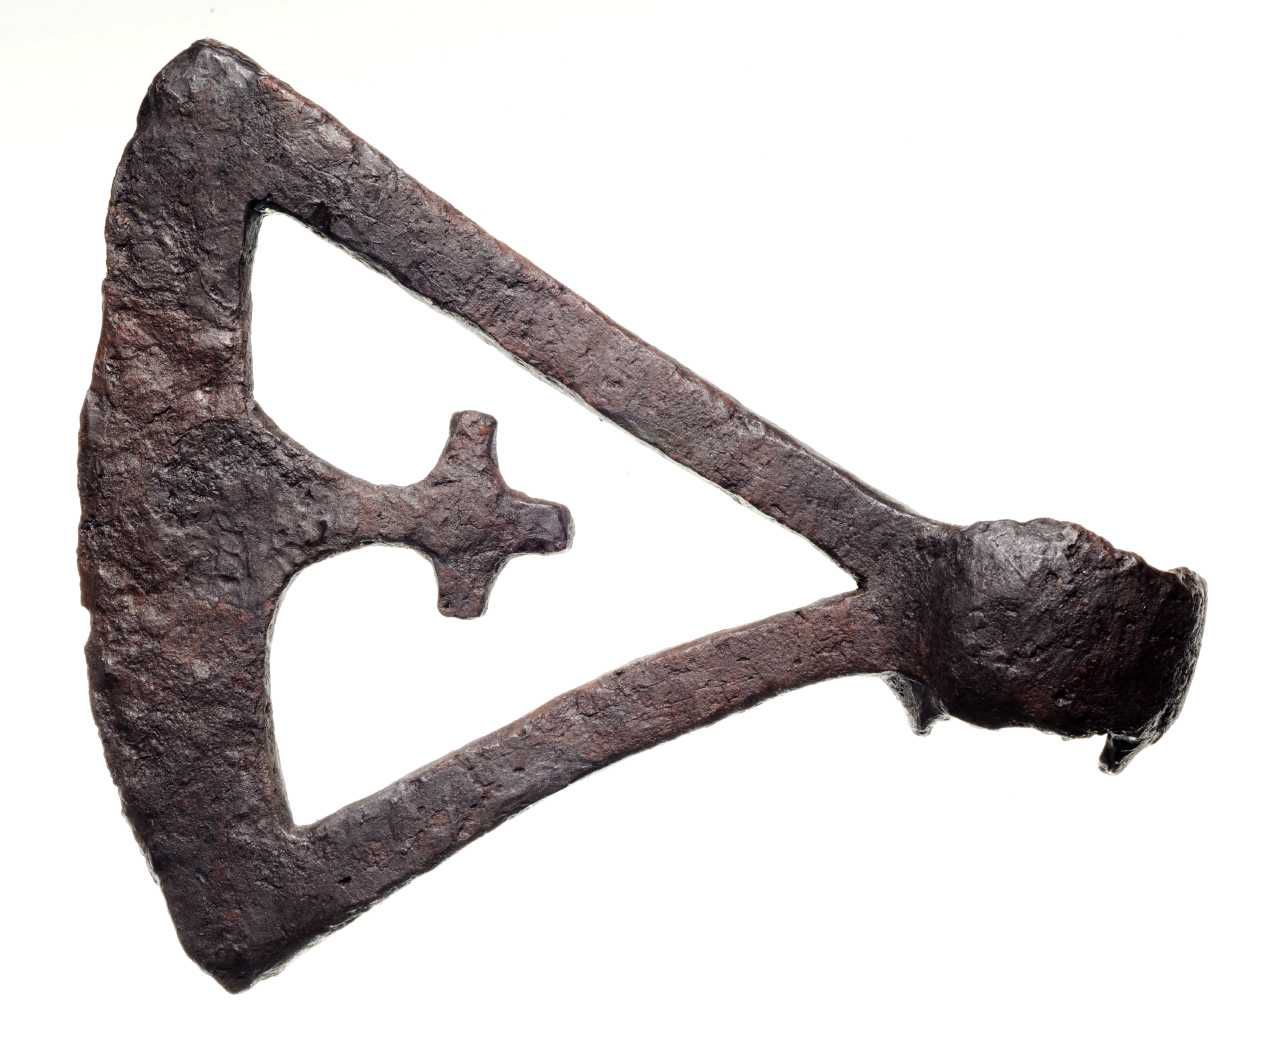 One of the six known Viking Age perforated axe head with a cut-out cross design, dating from 950 - 1050. This specific model is from Ludvigshave, Denmark.